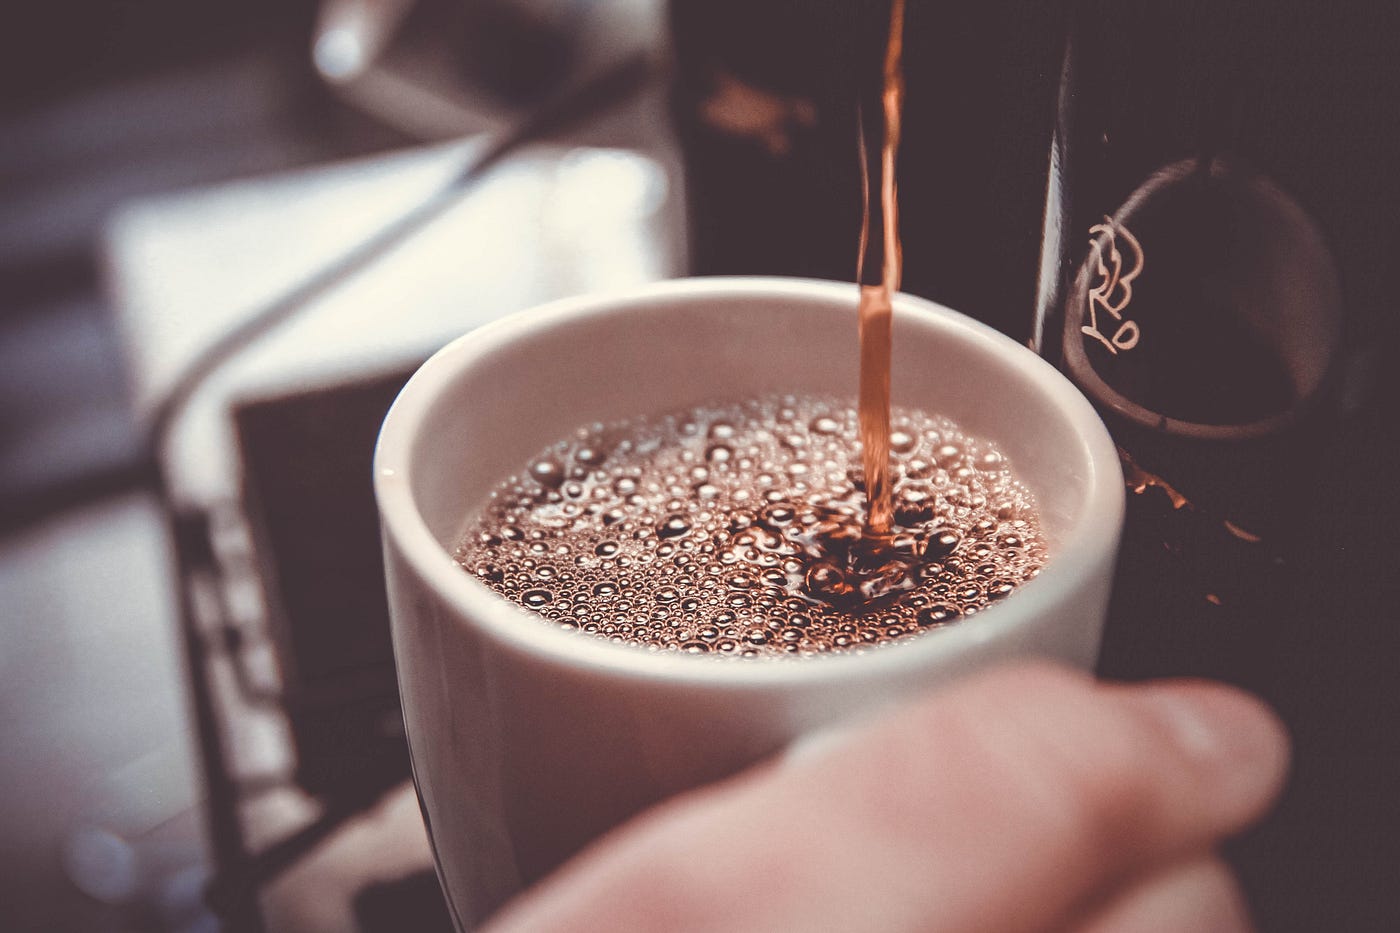 This Is the Healthiest Way to Drink Coffee | by Markham Heid | Elemental